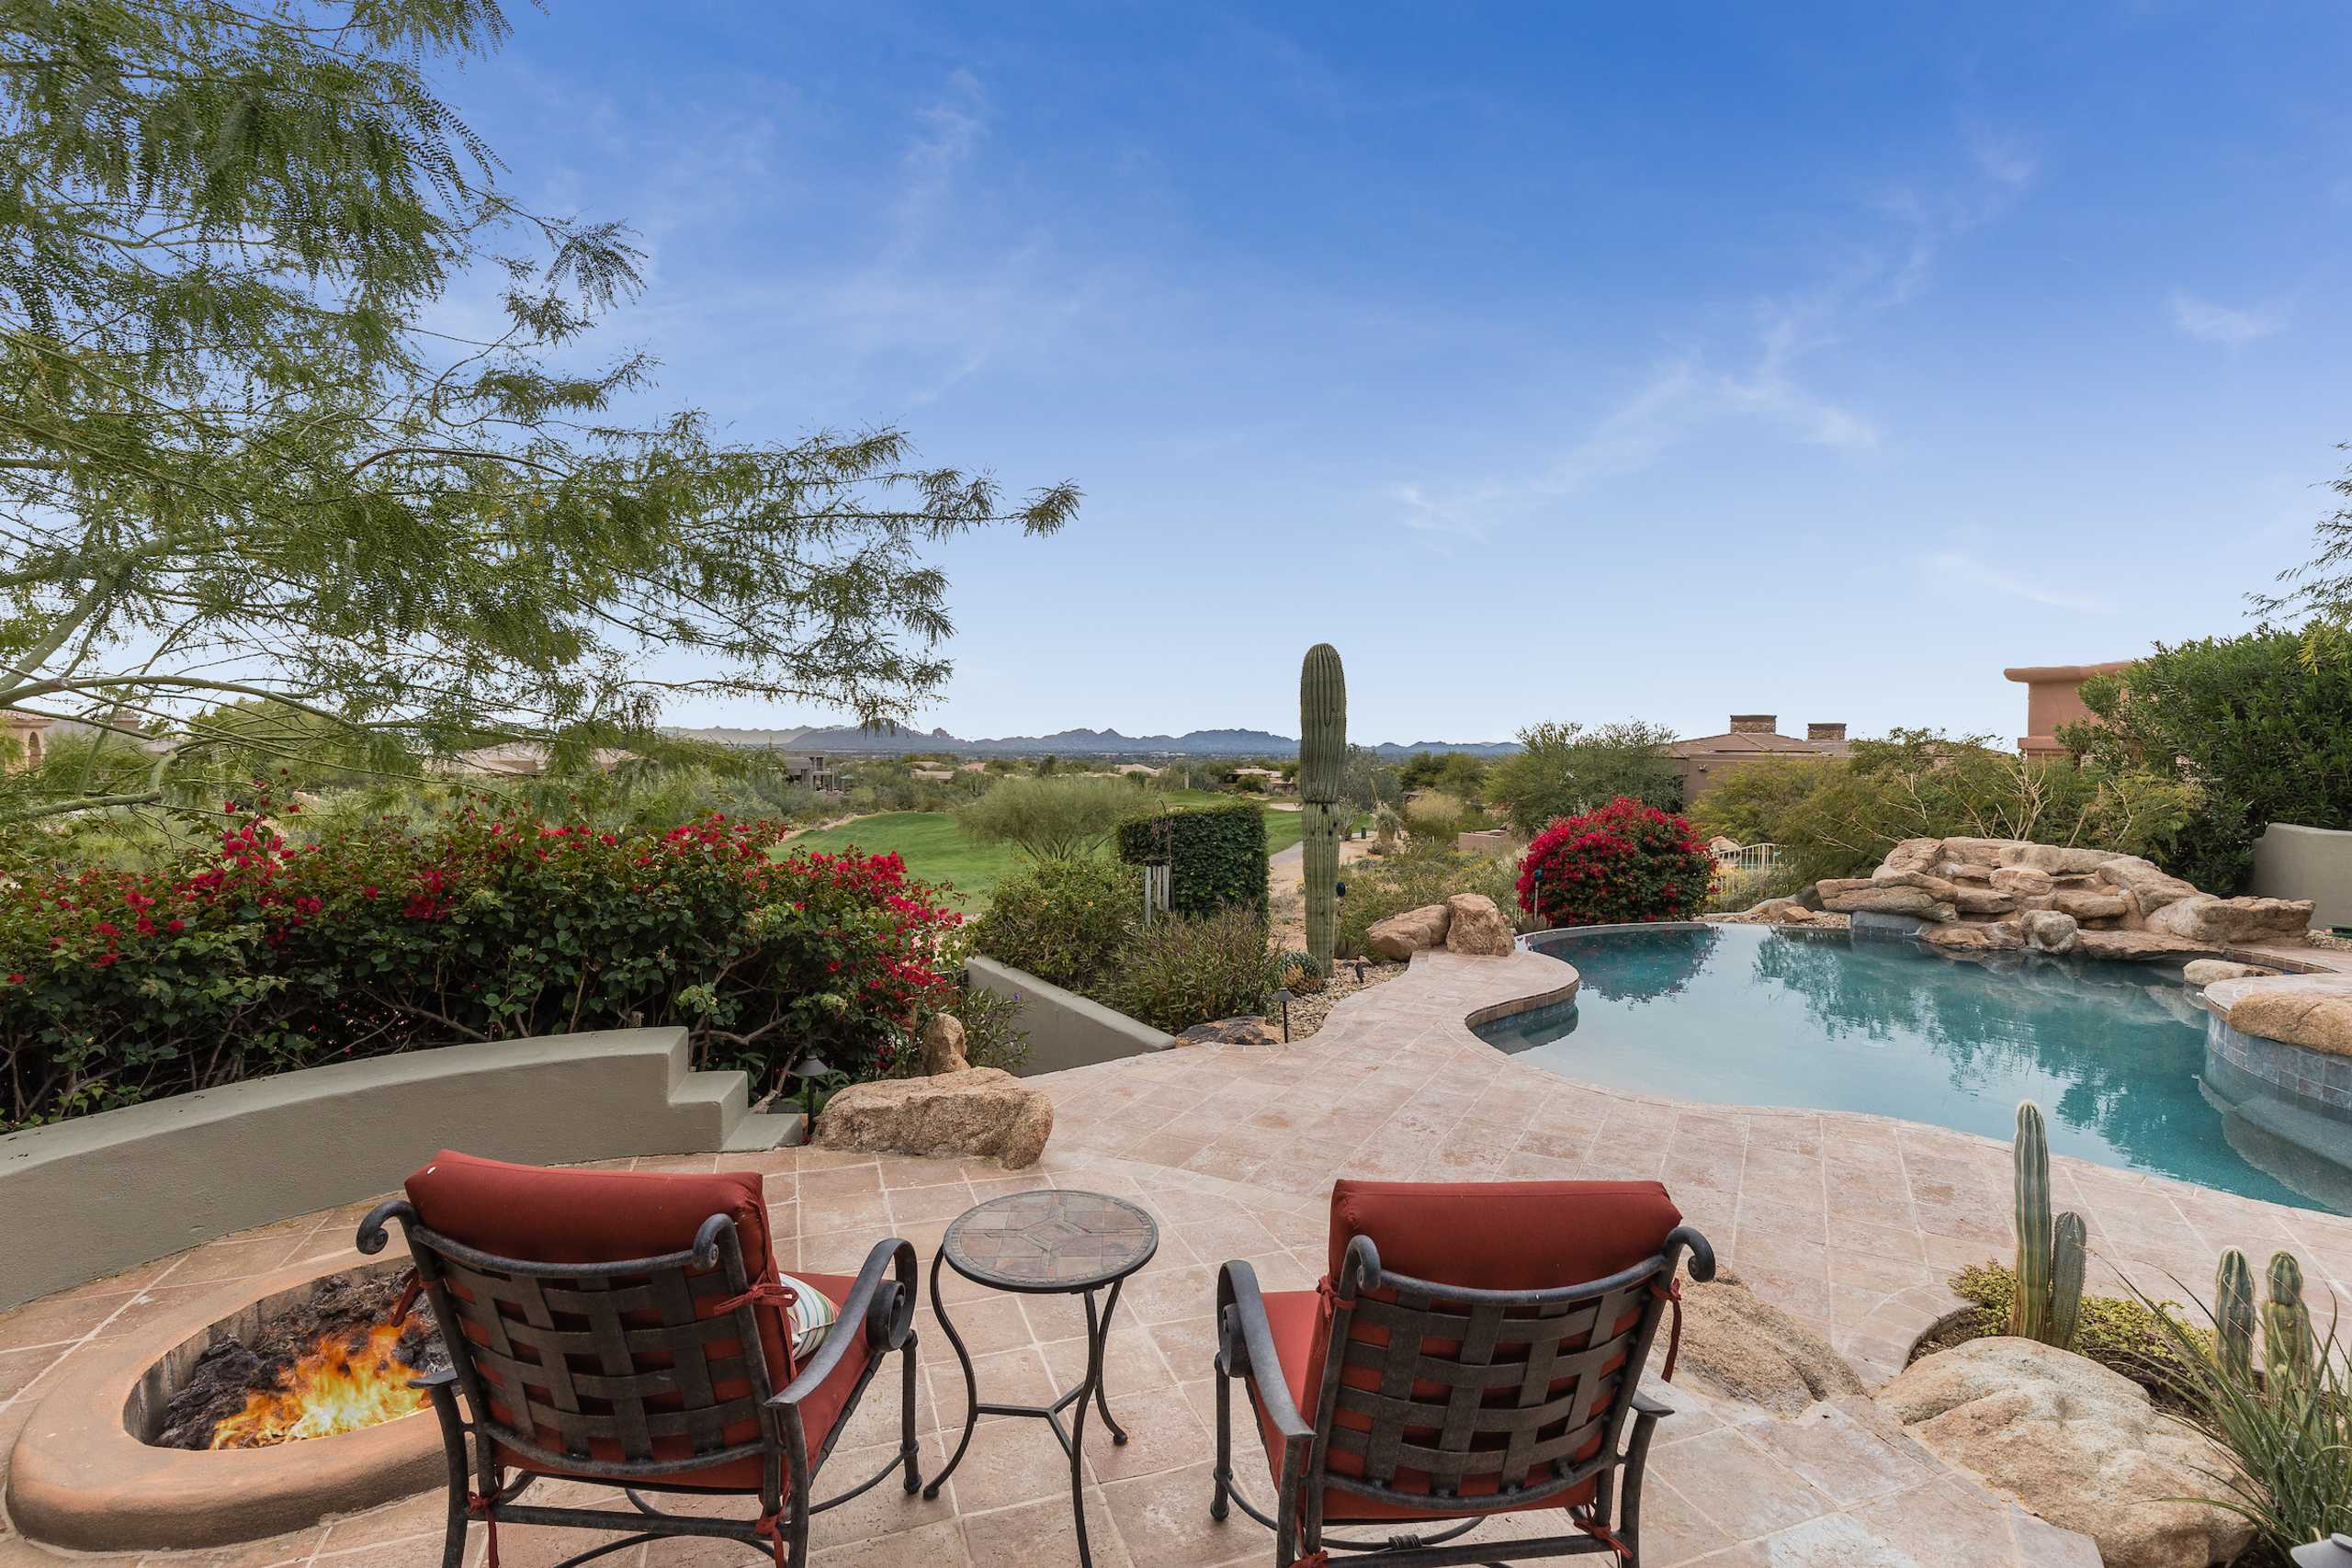 Relax to views of Camelback & lush fairways at Ancala CC, Scottsdale